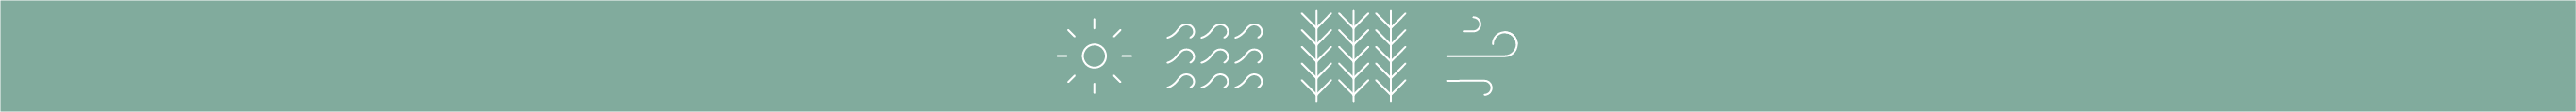 banner-elements-green.png